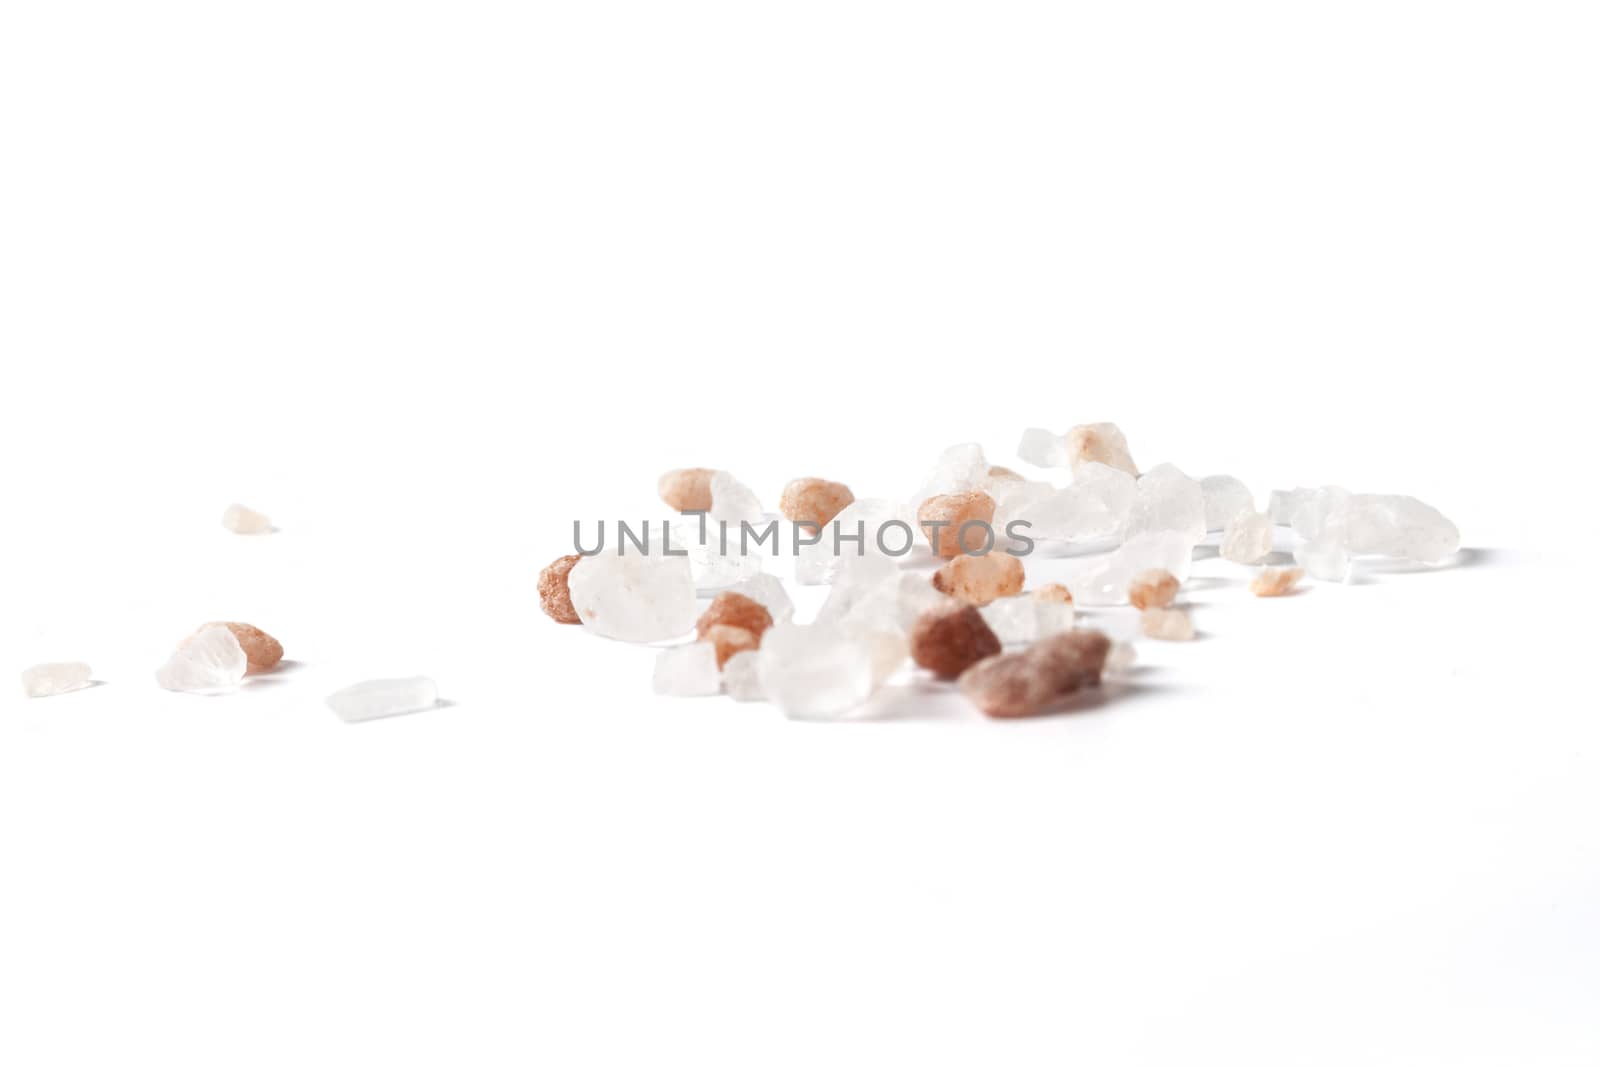 Himalayan Salt Raw Crystals Isolated on White Background